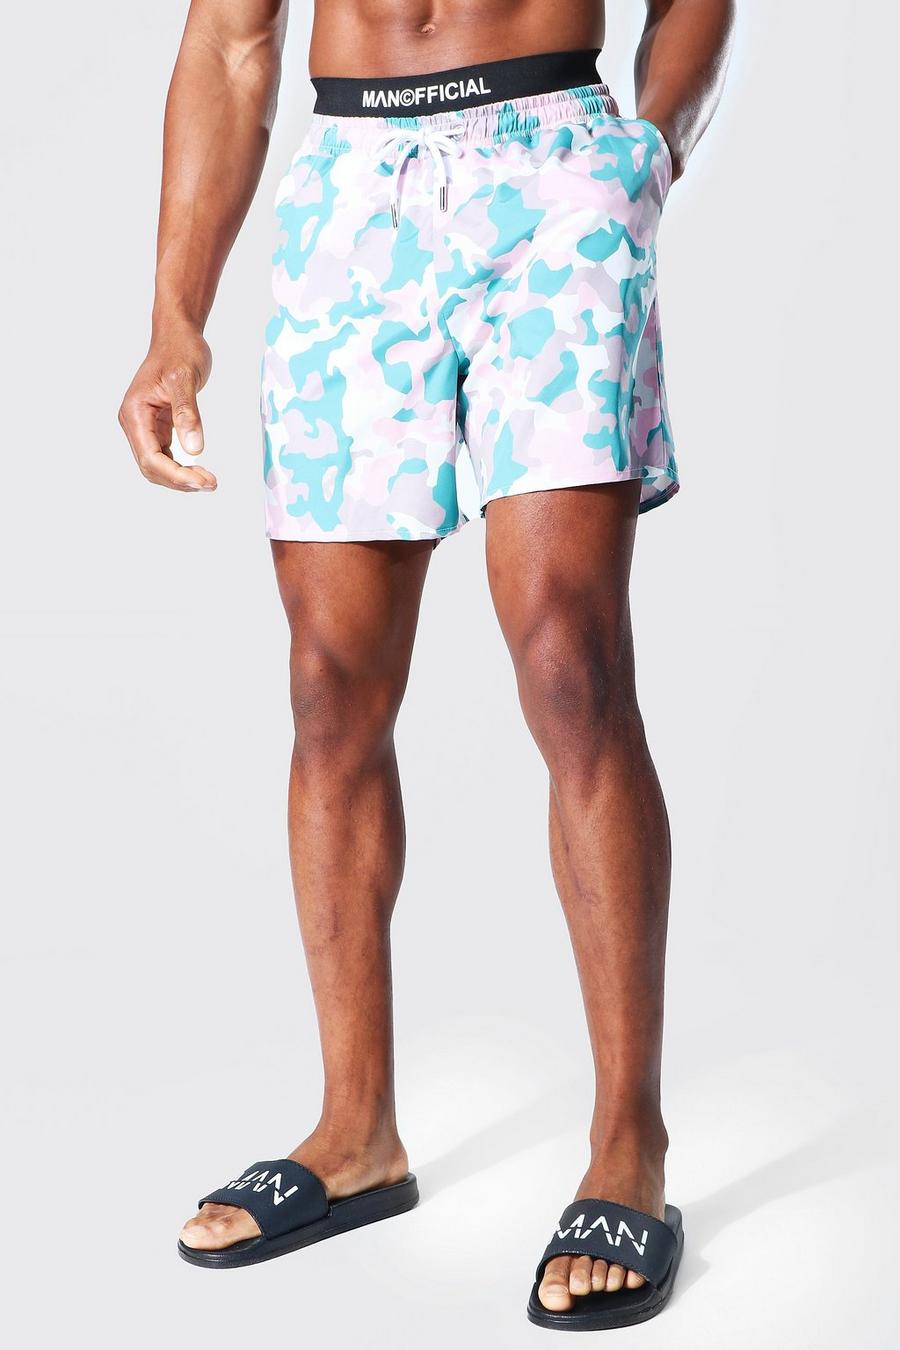 Teal Man Official Camo Mid Length Swim Short image number 1